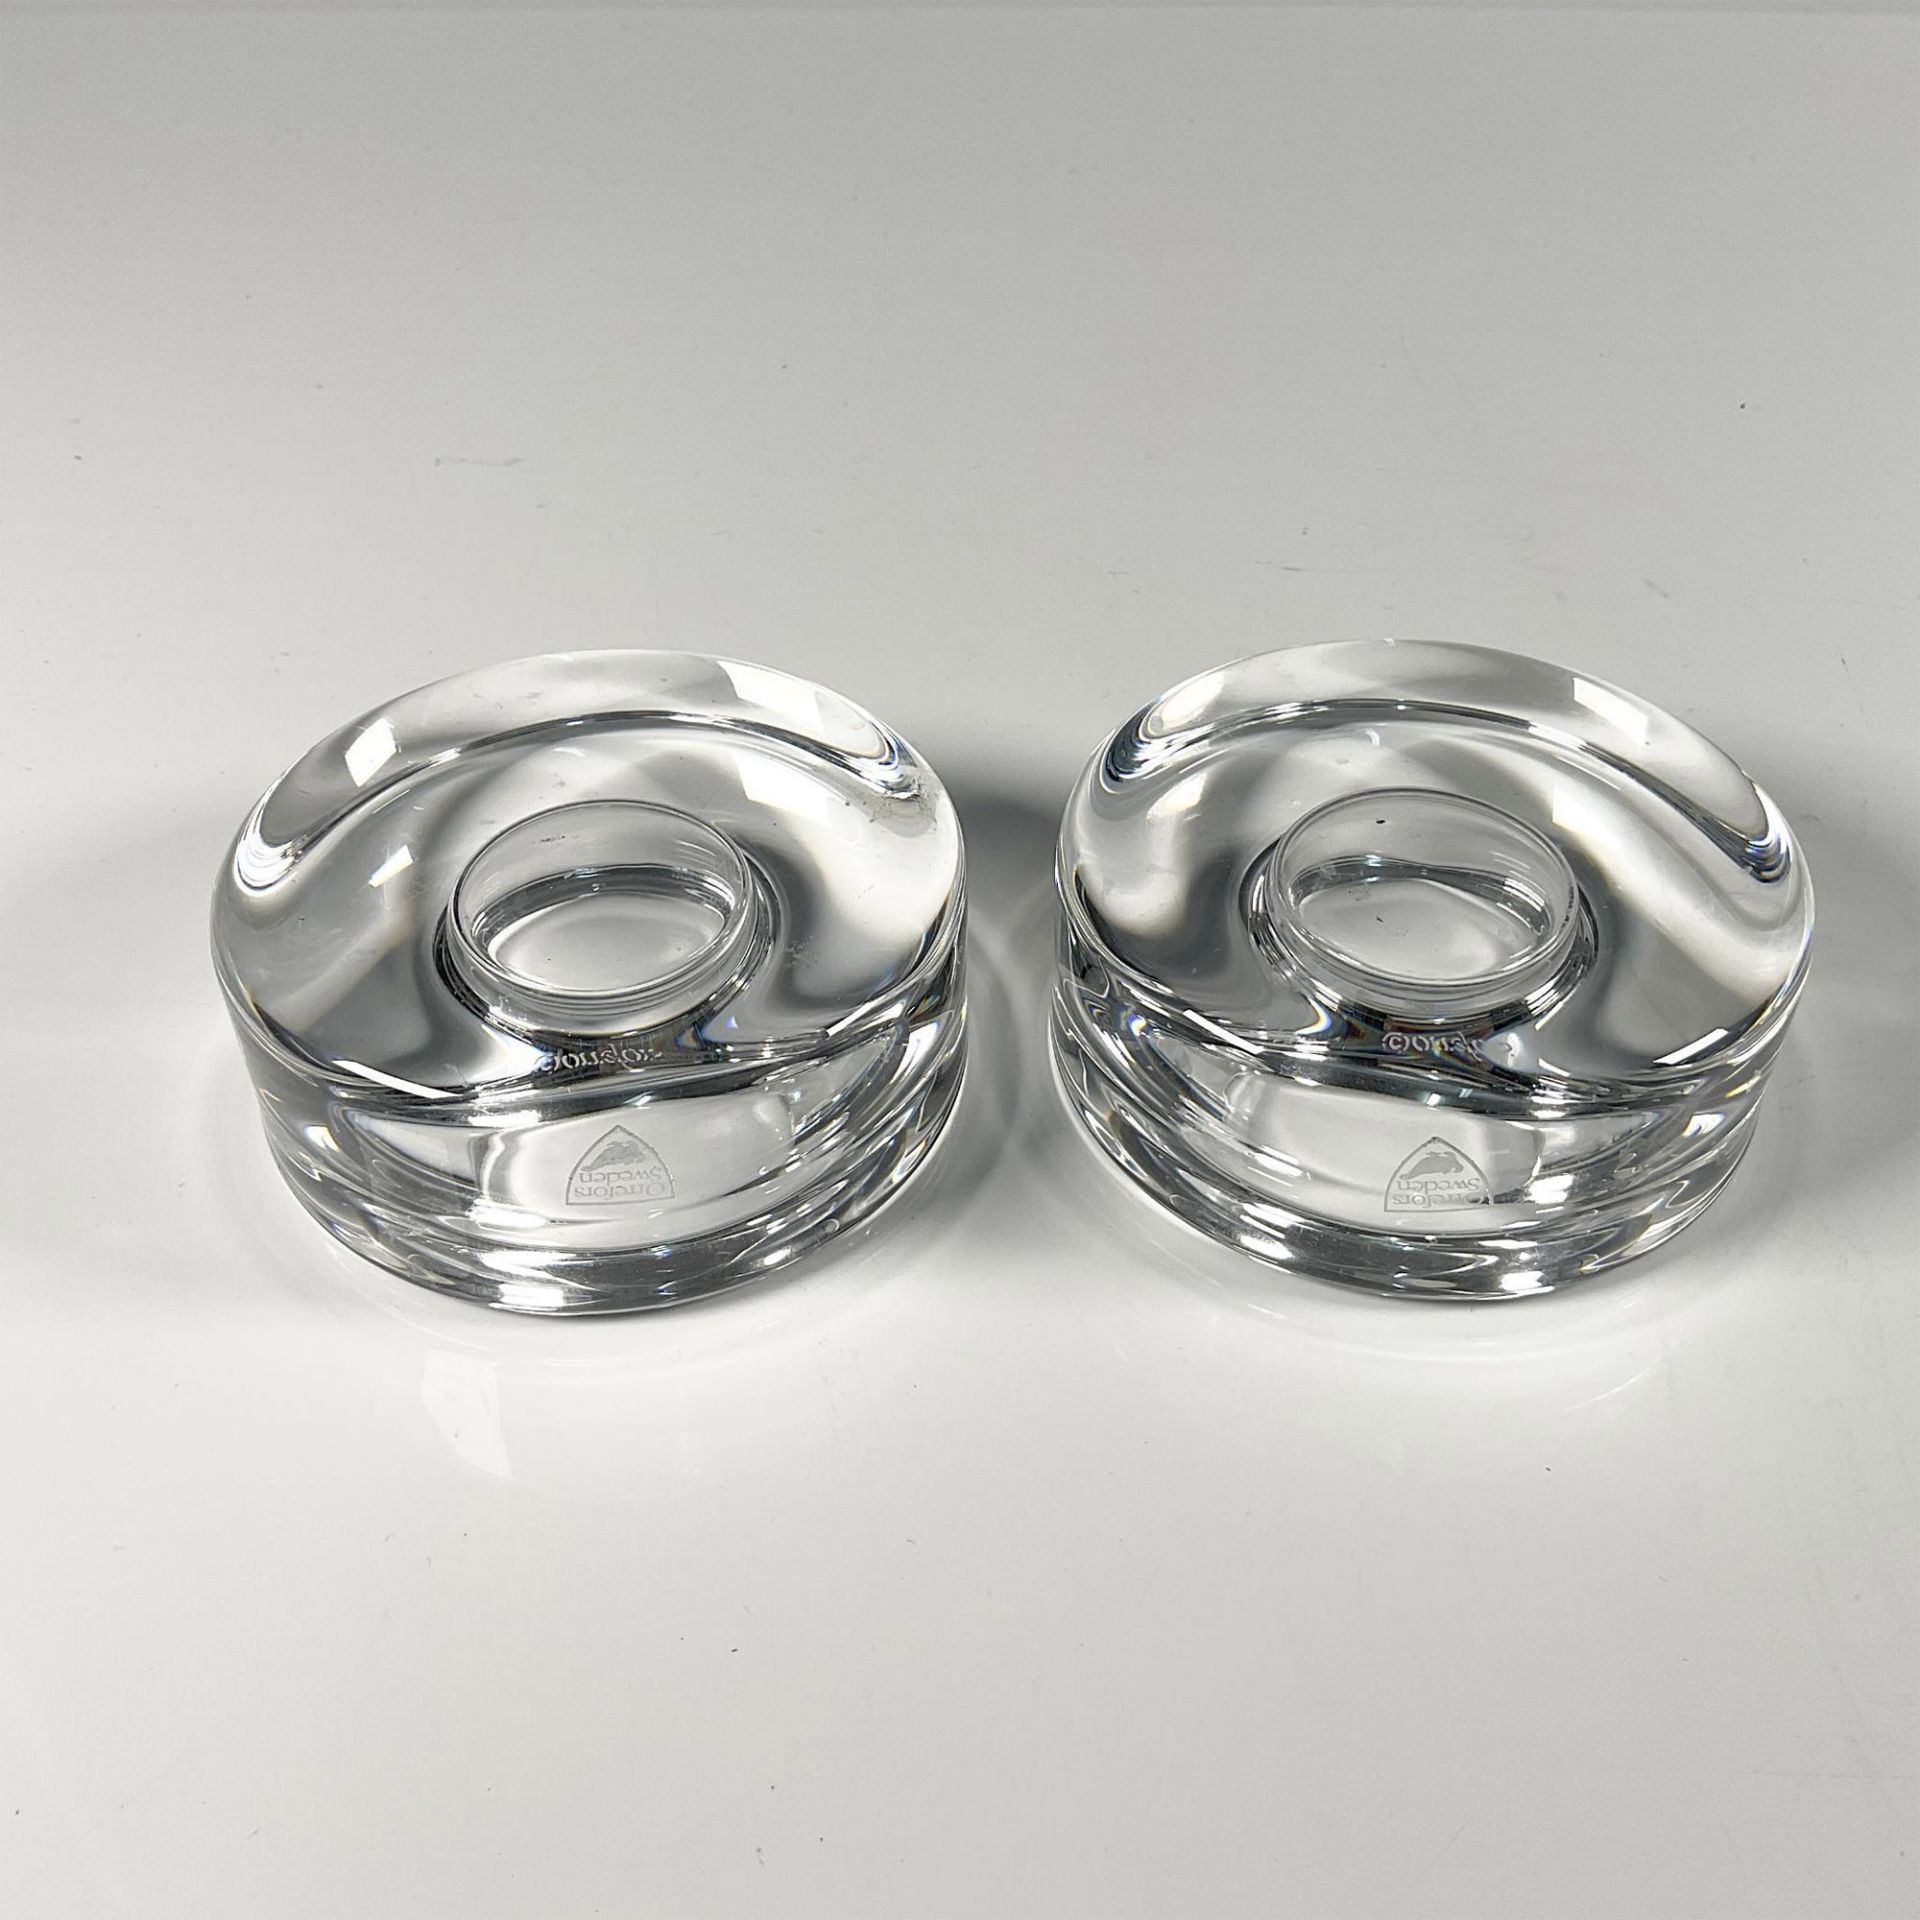 2pc Orrefors Crystal Candleholders, Puck - Image 2 of 4